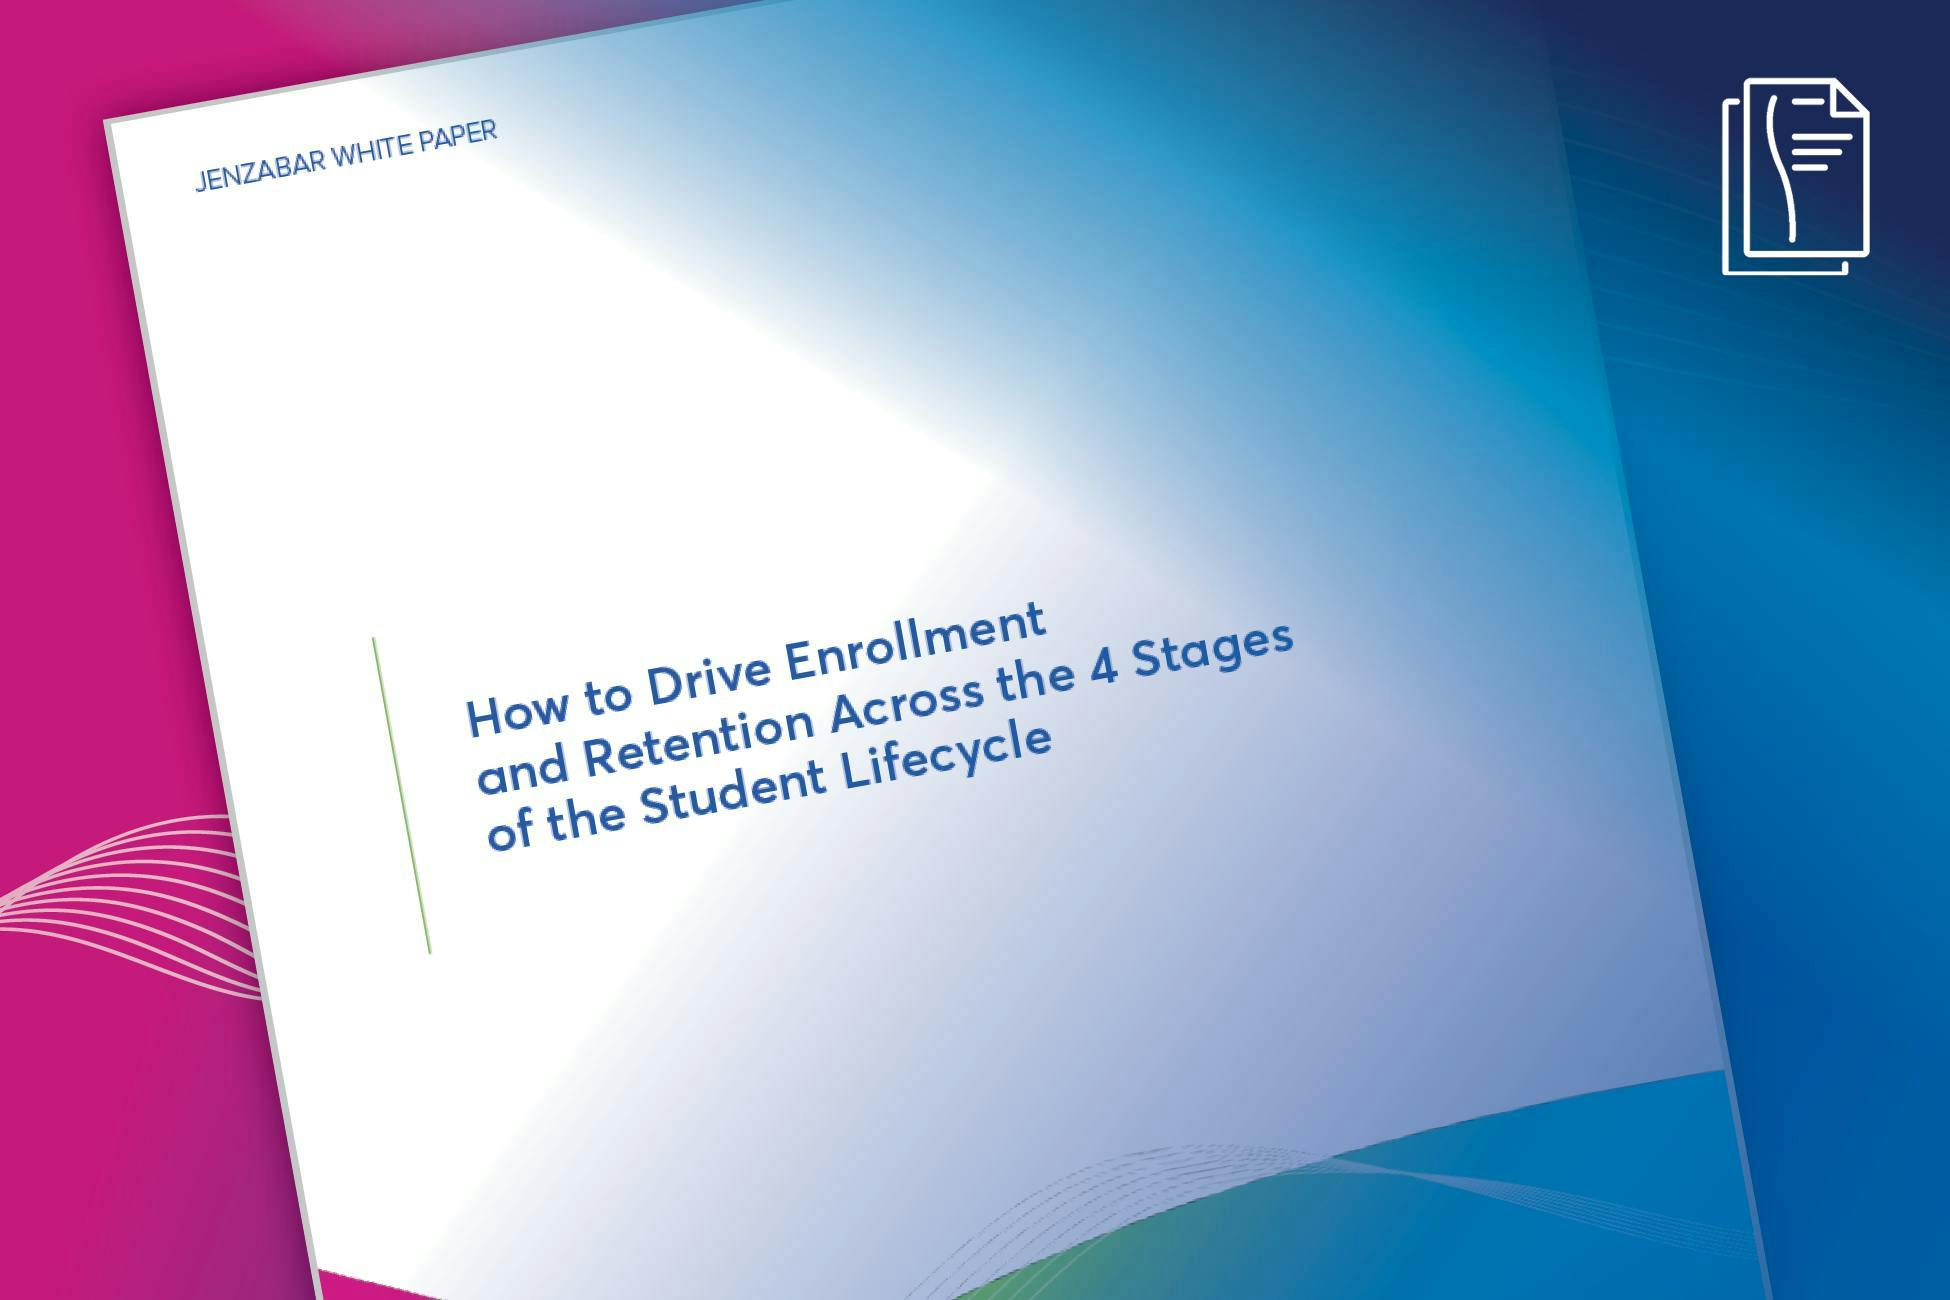 White Paper: How to Drive Enrollment and Retention Across the 4 Stages of the Student Lifecycle 